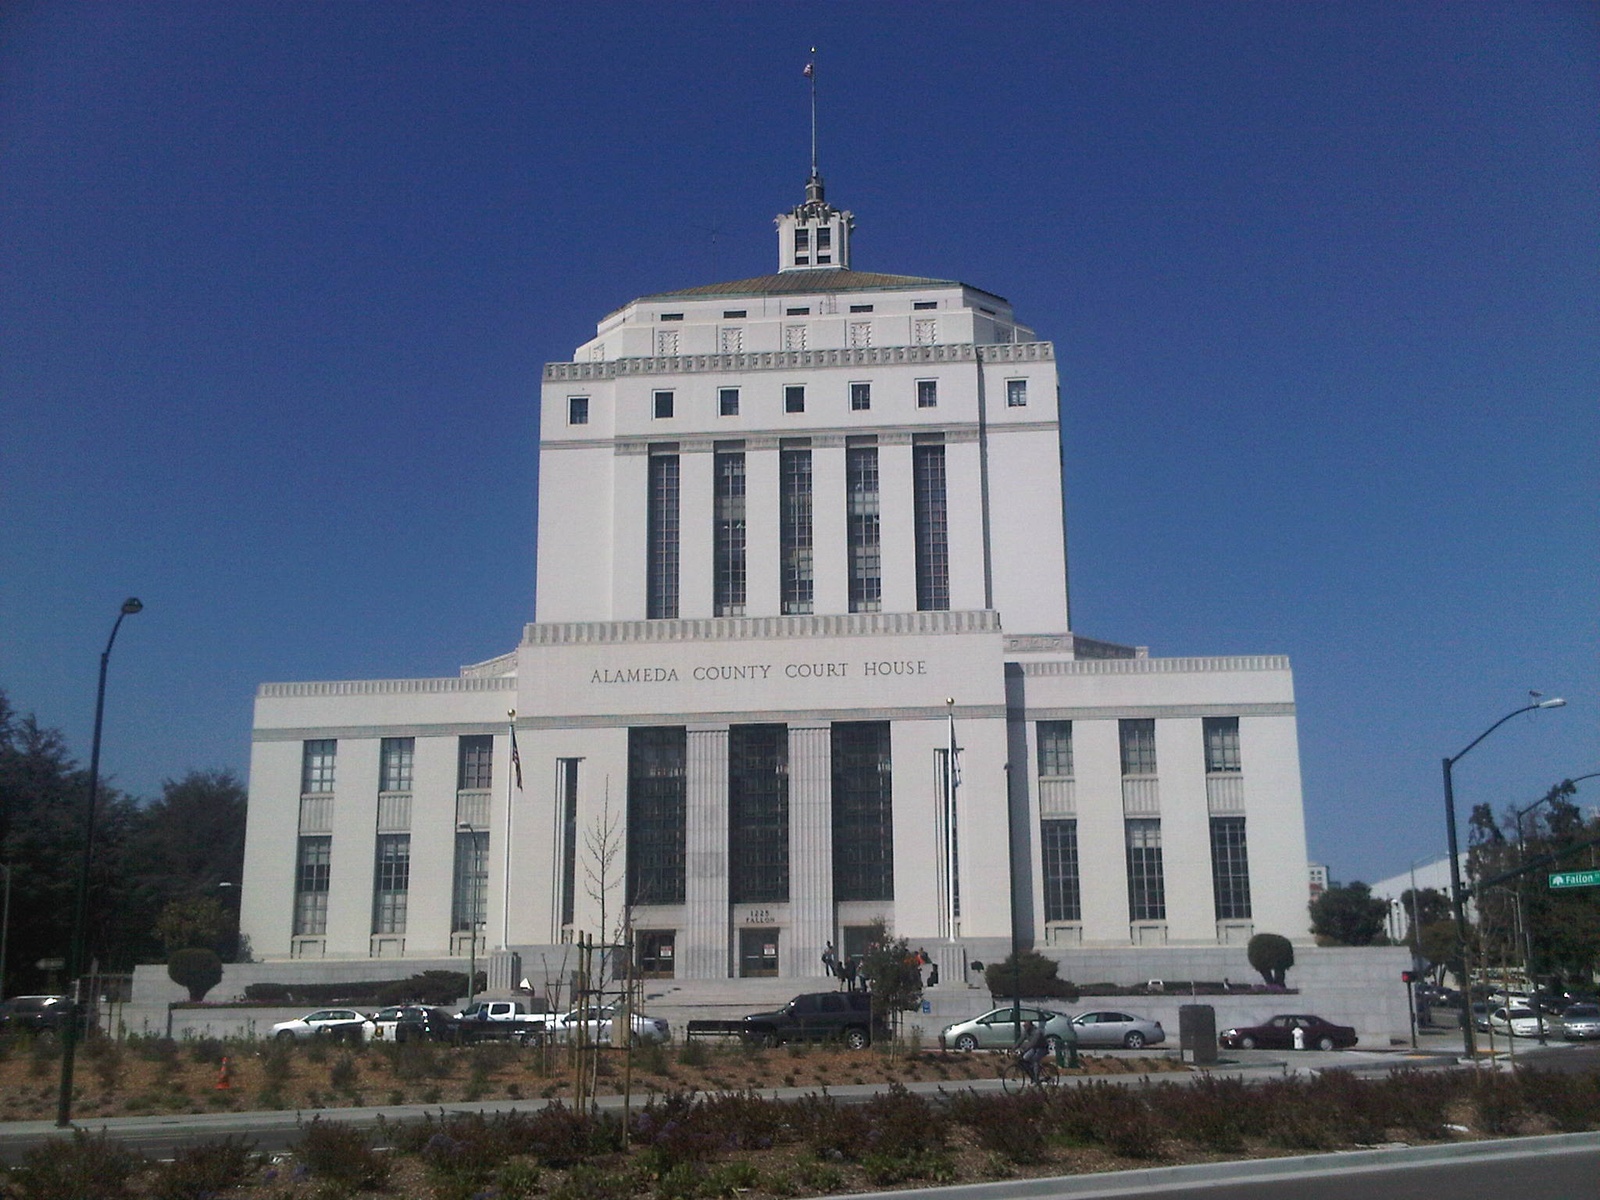 Information about Alameda County Court House IMG 20130322 24169 jpg